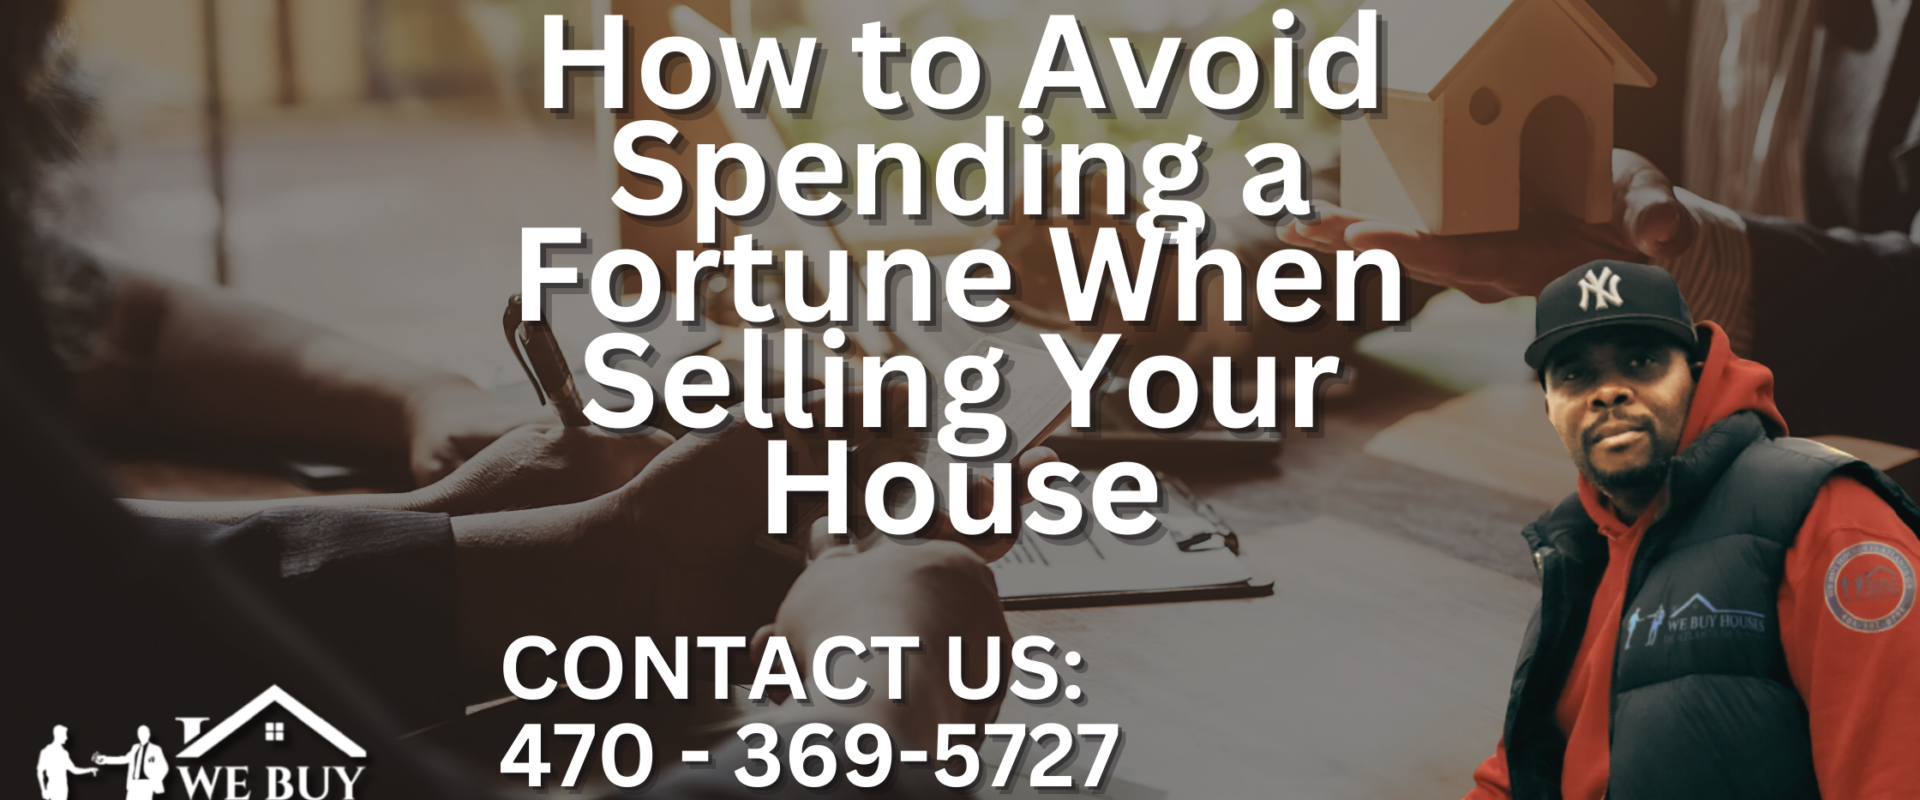 How-to-Avoid-Spending-a-Fortune-When-Selling-Your-House